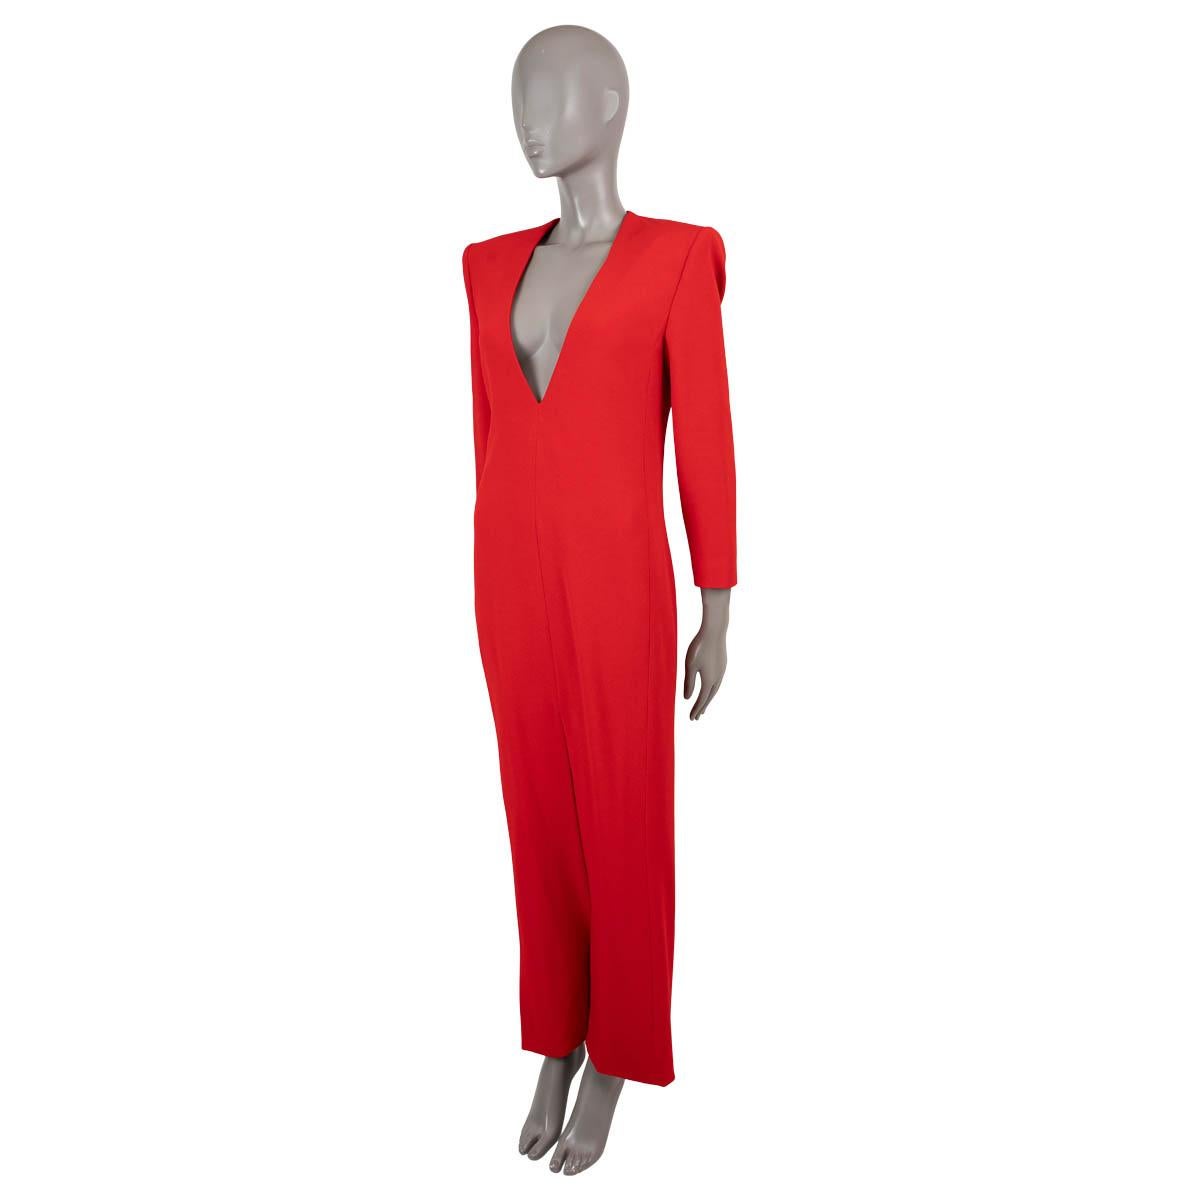 100% authentic Saint Laurent crêpe gown in red wool (100%). Features sharp padded shoulders, a plunging V neckline, high slit skirt and long sleeves. Closes with a concealed zipper in the back and is lined in acetate (78%) and viscose (22%). Has